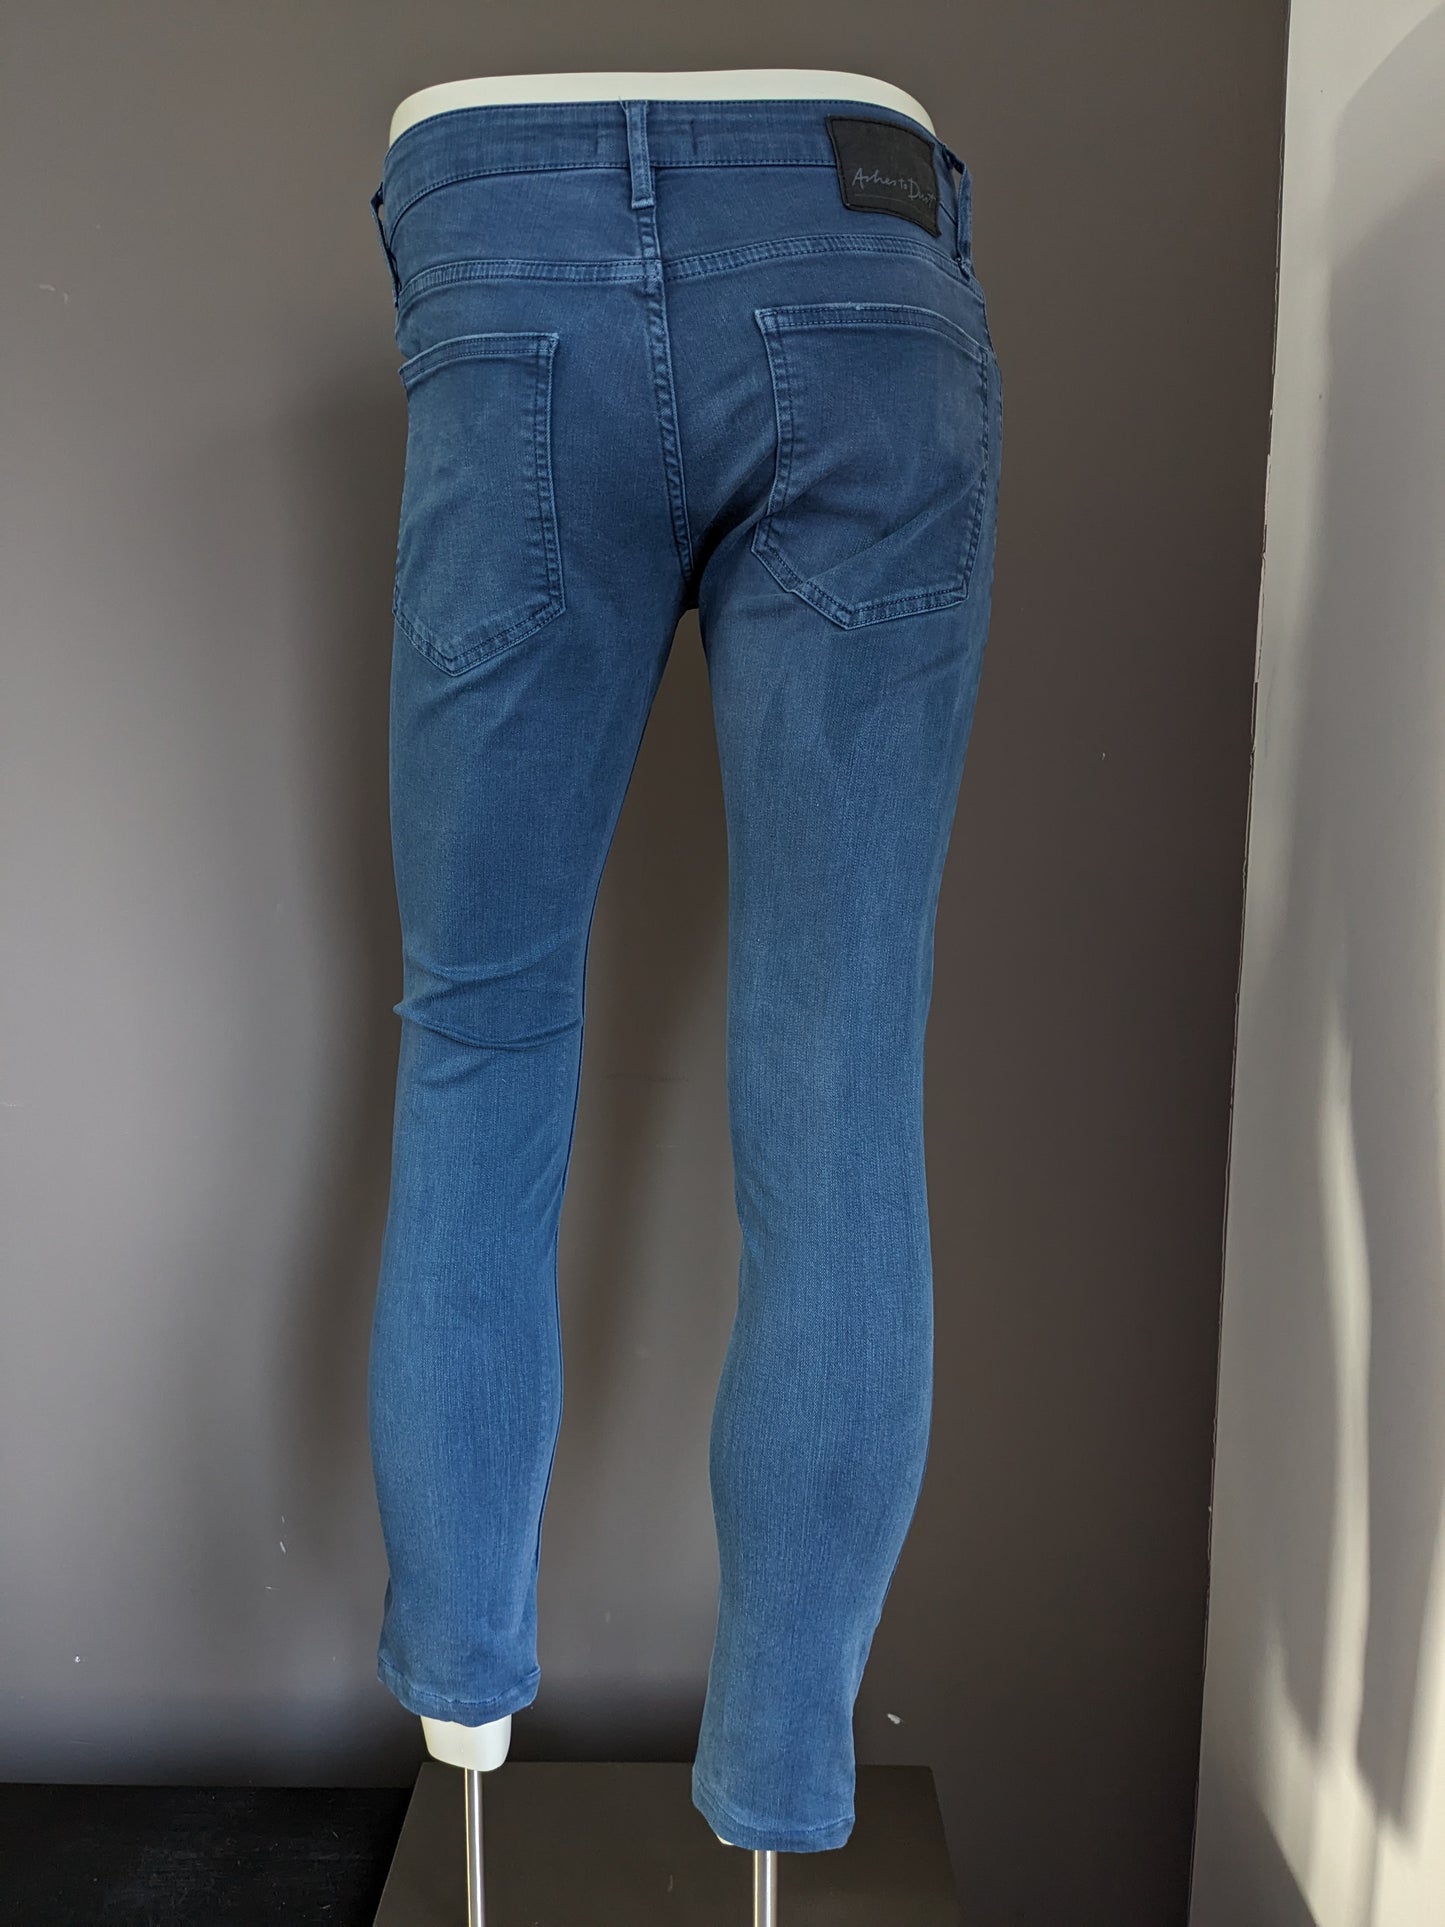 Ashes to Dust Jeans. Blauw. Maat W30 - L26 stretch.